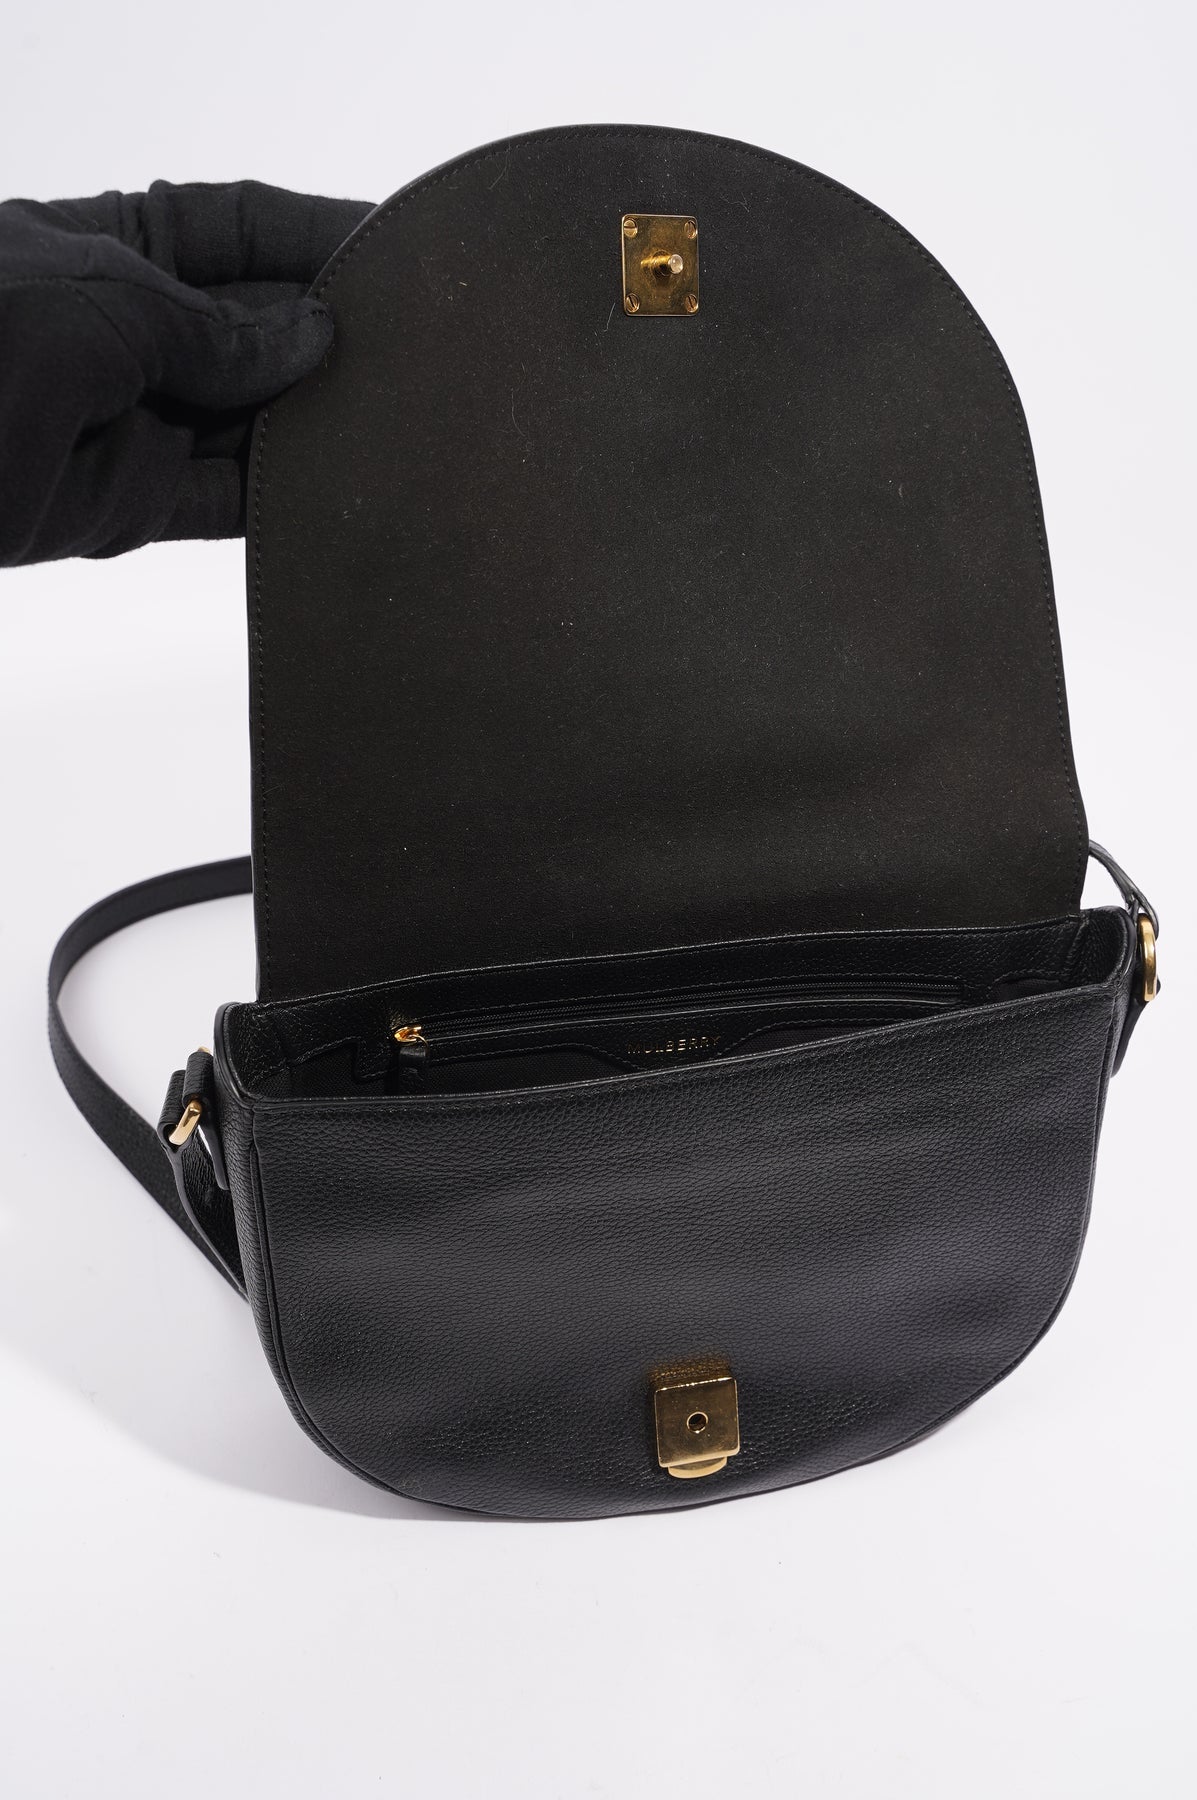 Udvidelse Duke Supermarked Mulberry Womens Tessie Satchel Black – Luxe Collective